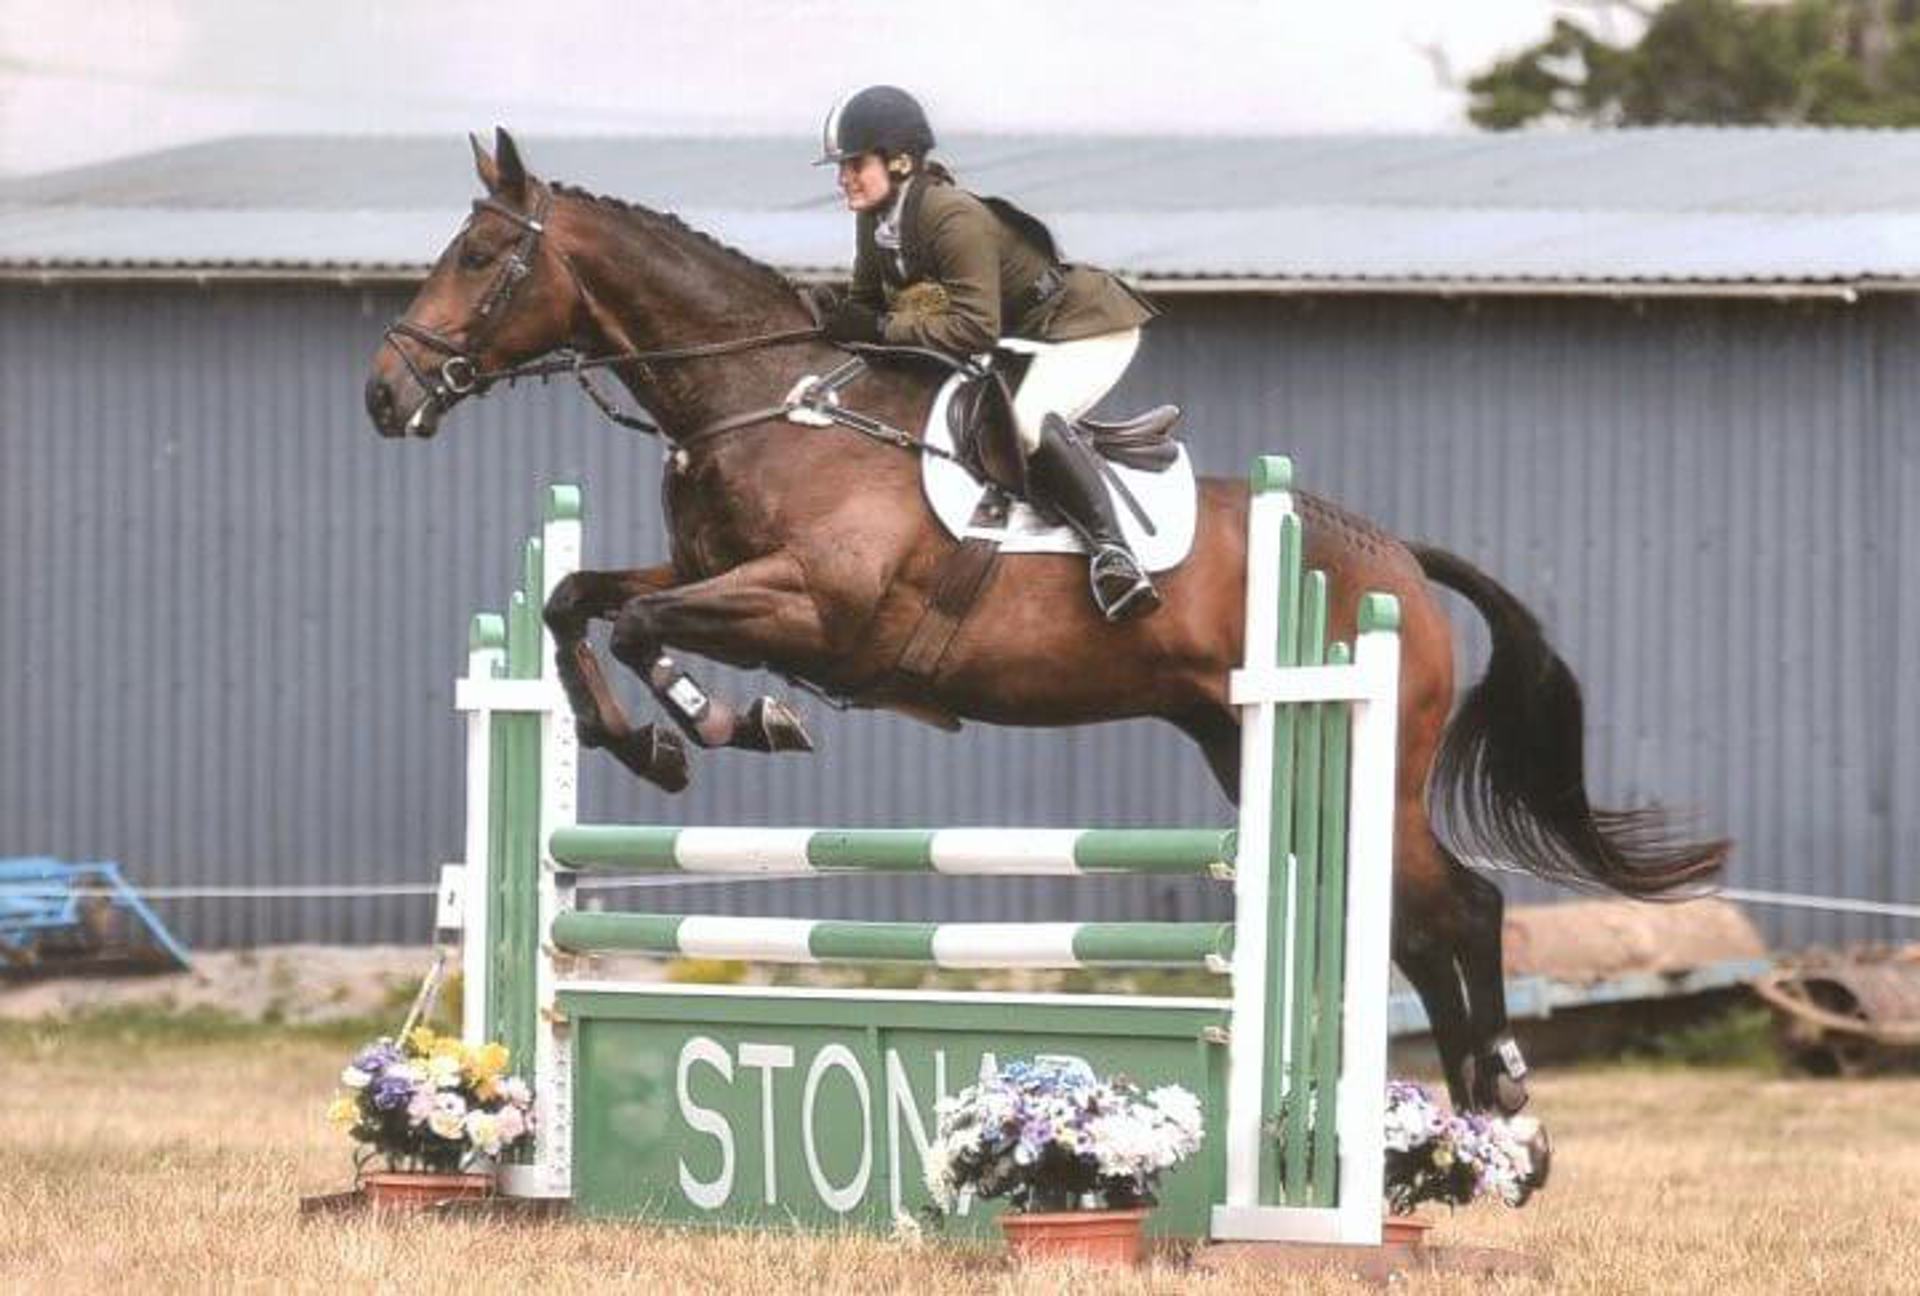 A horse rider jumping over a green fence